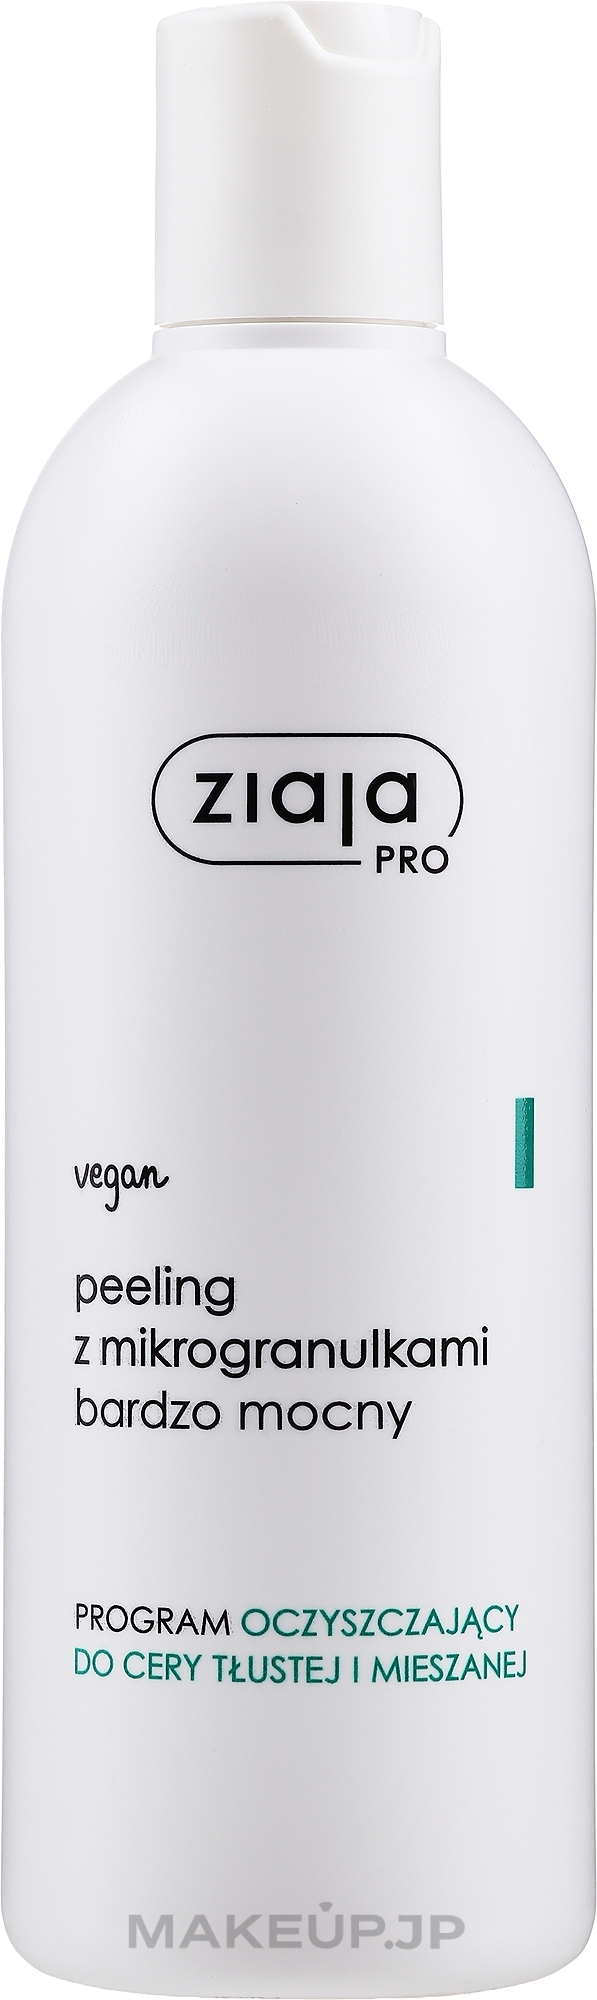 Extra Strong Face Peeling with Microgranules - Ziaja Pro Very Strong Peeling With Microgranules — photo 270 ml